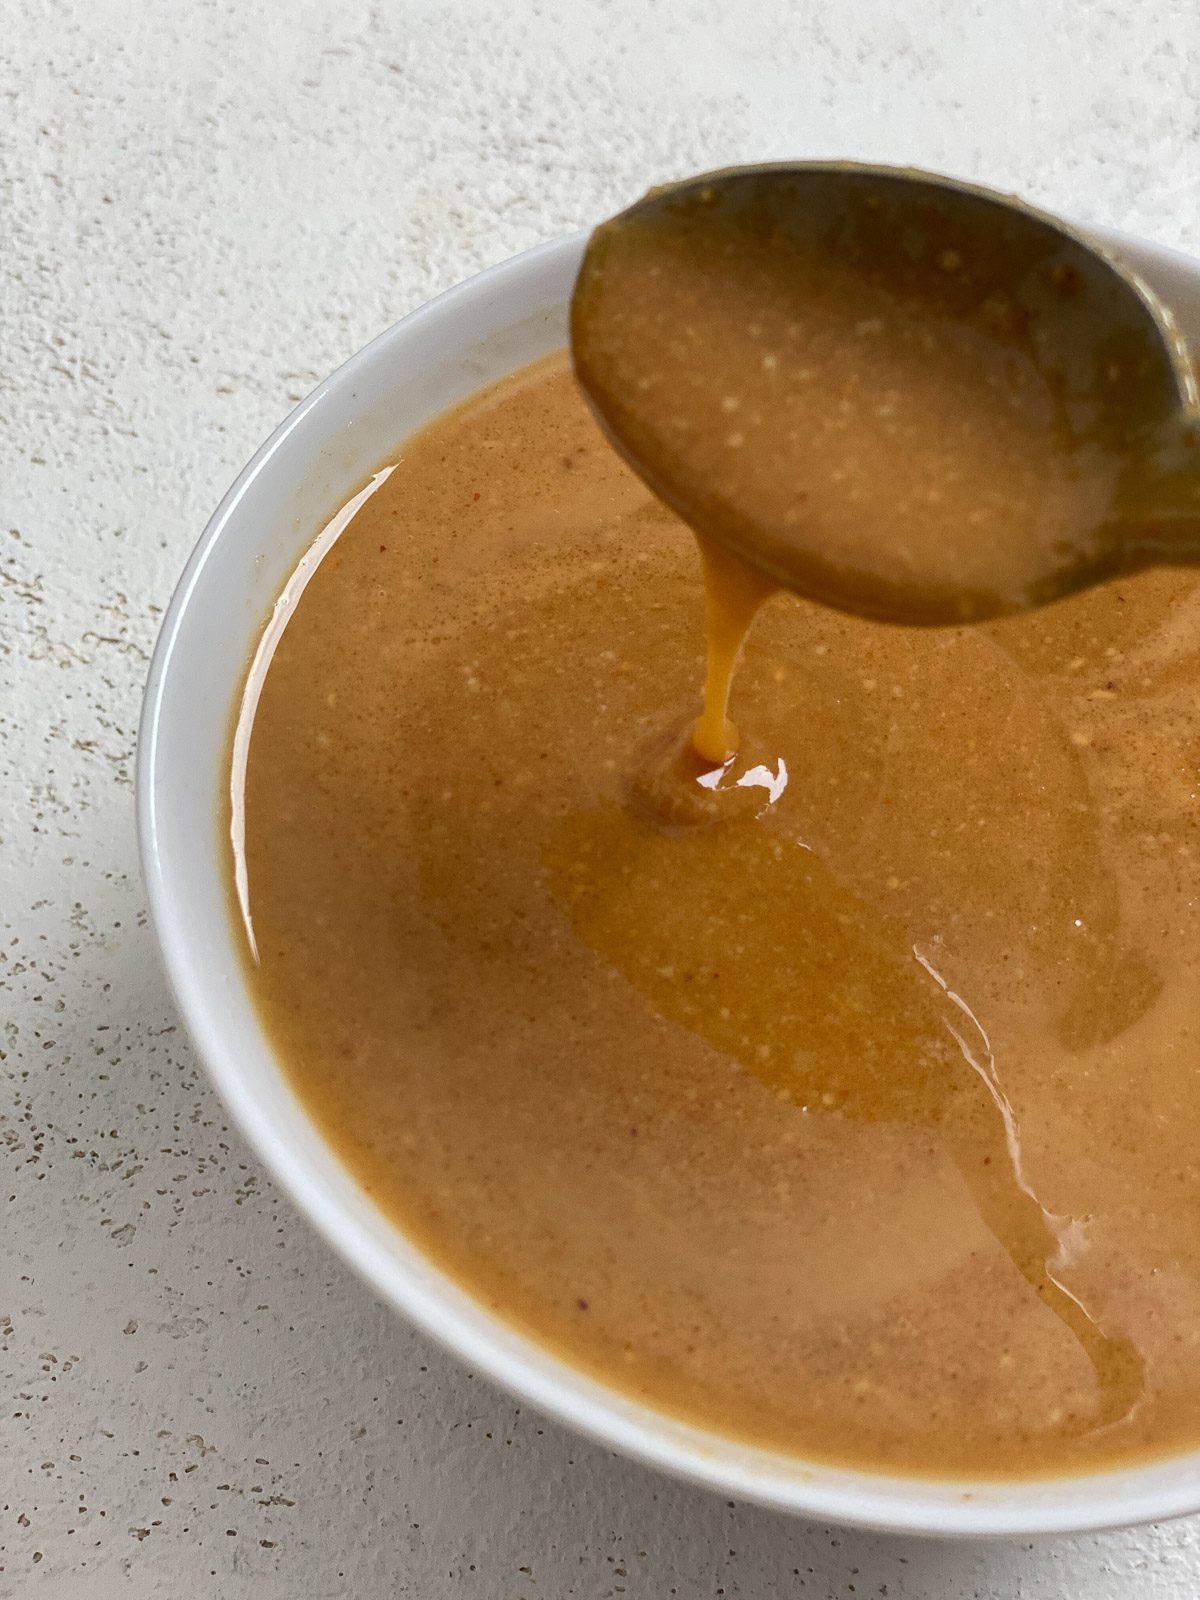 completed Simple Vegan Caramel in a bowl with caramel drizzling down from a spoon against a white background